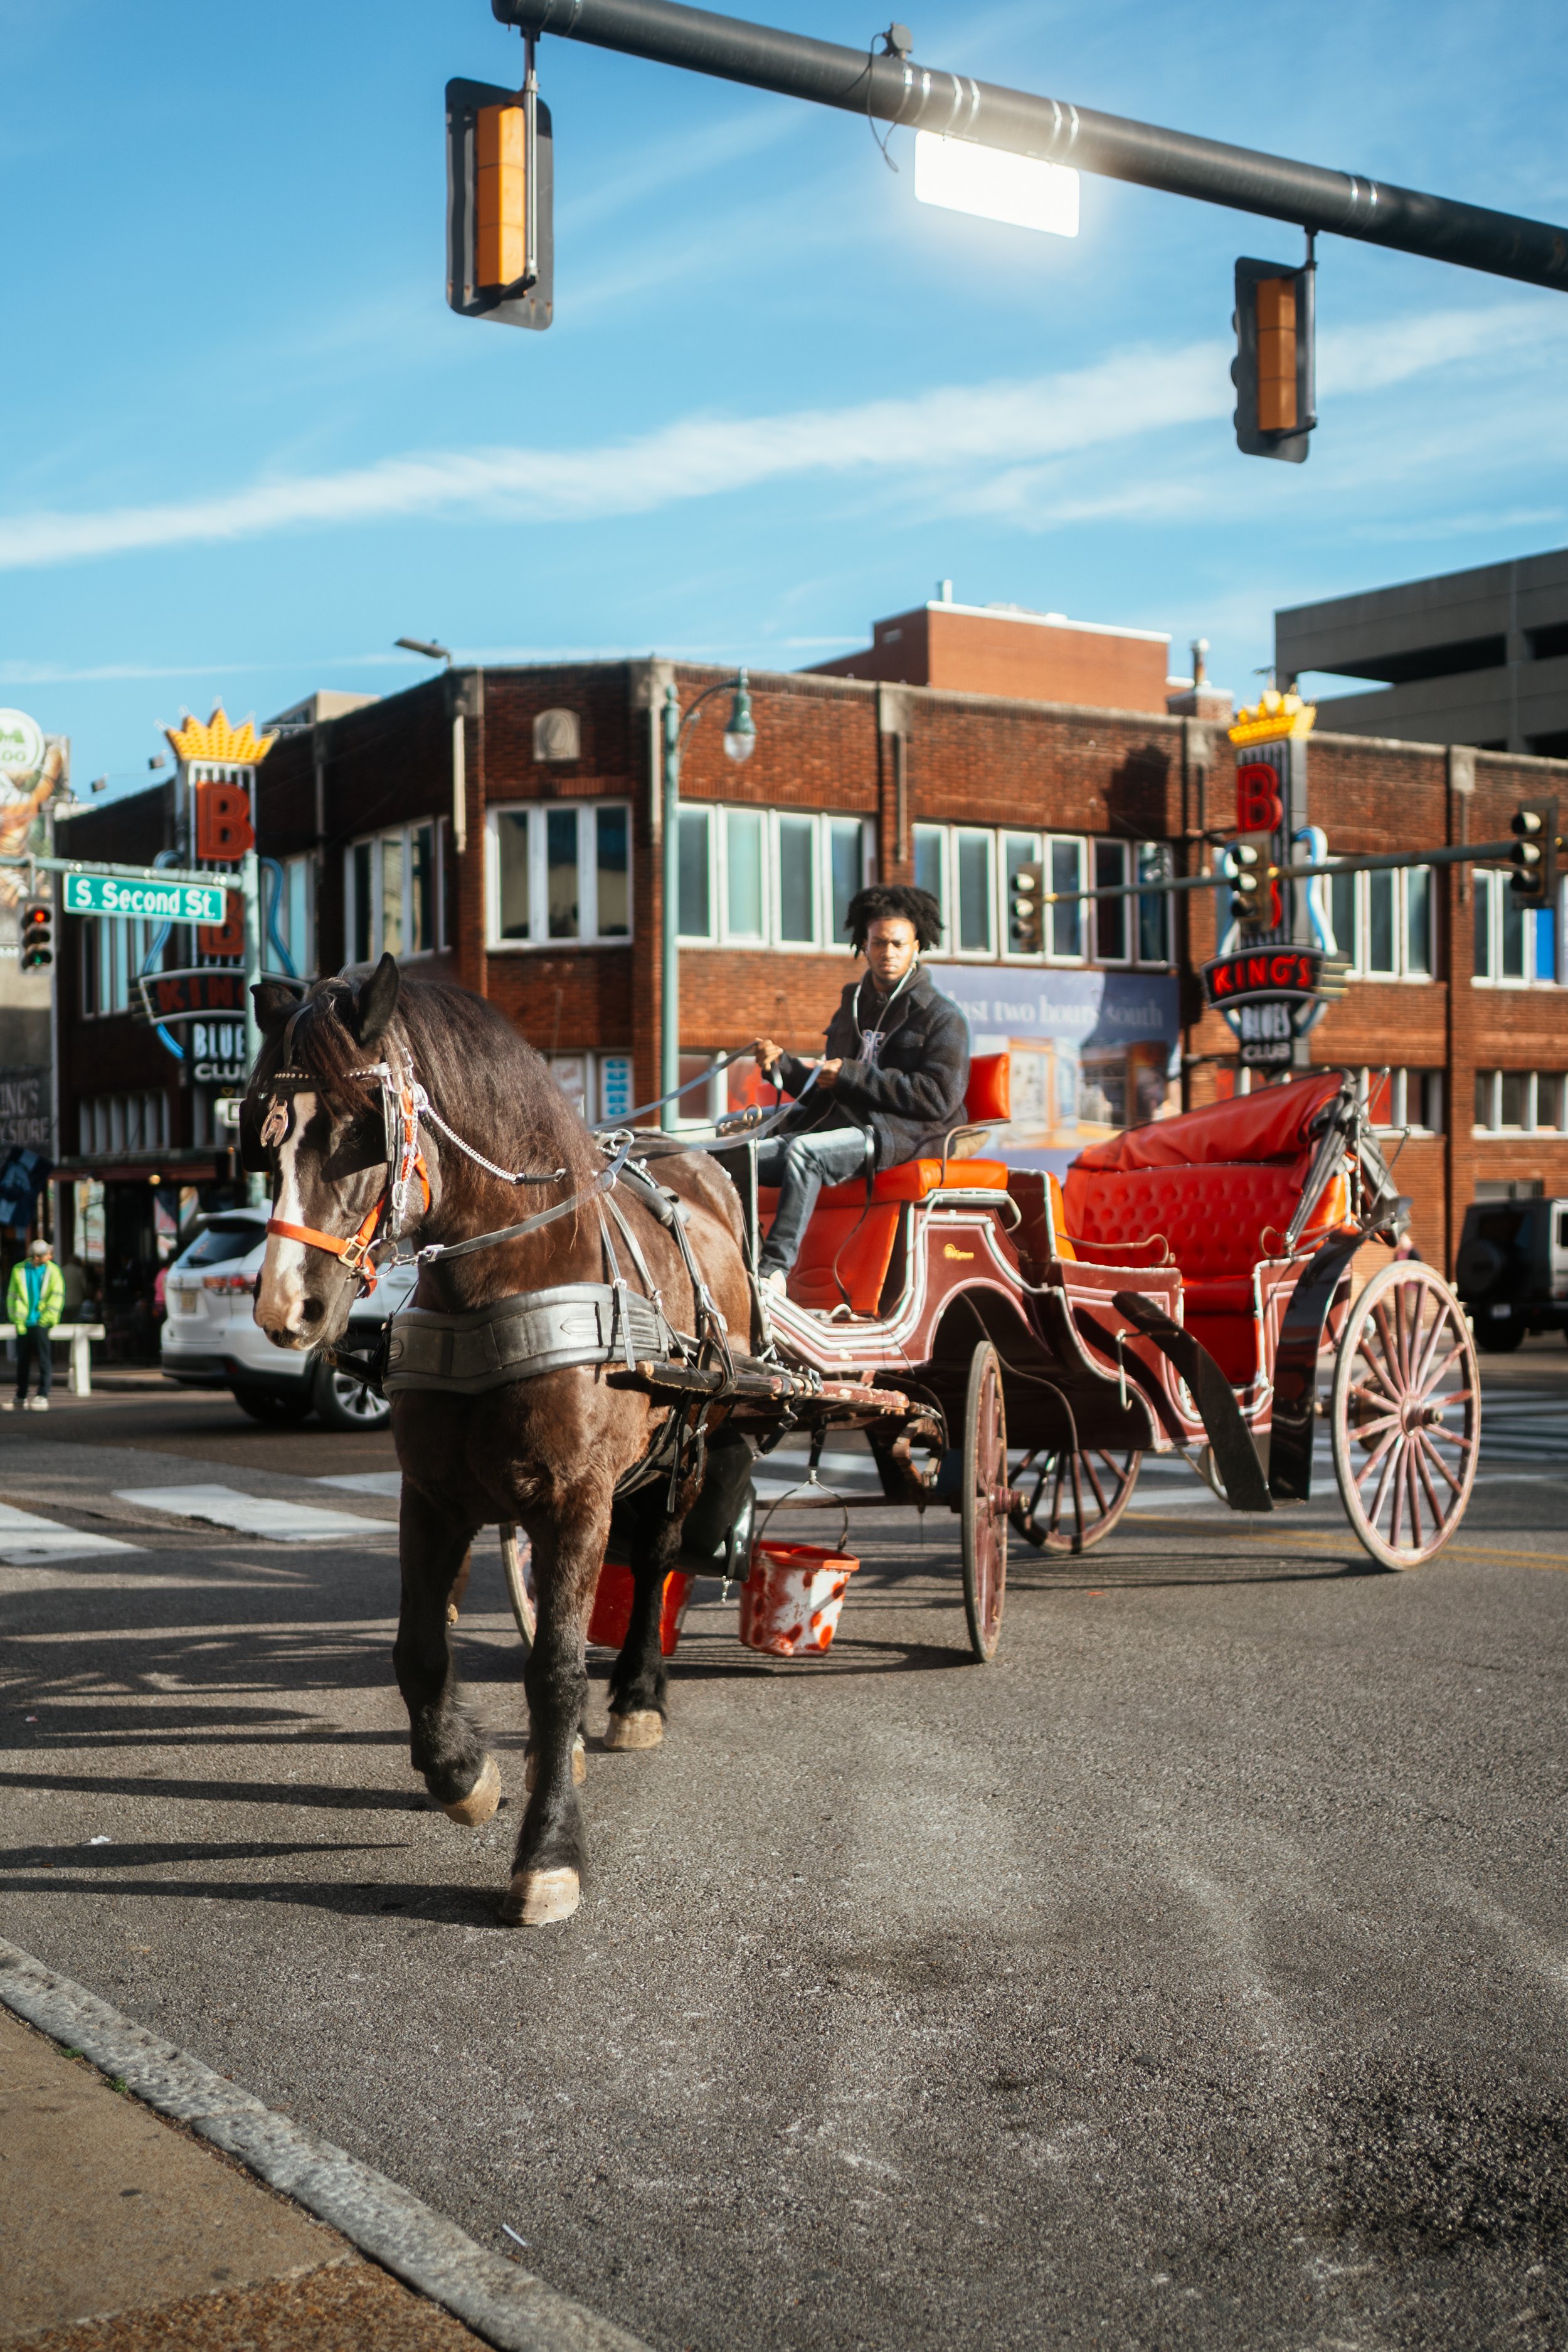 Beale street and it's vibrant horse drawn carriages